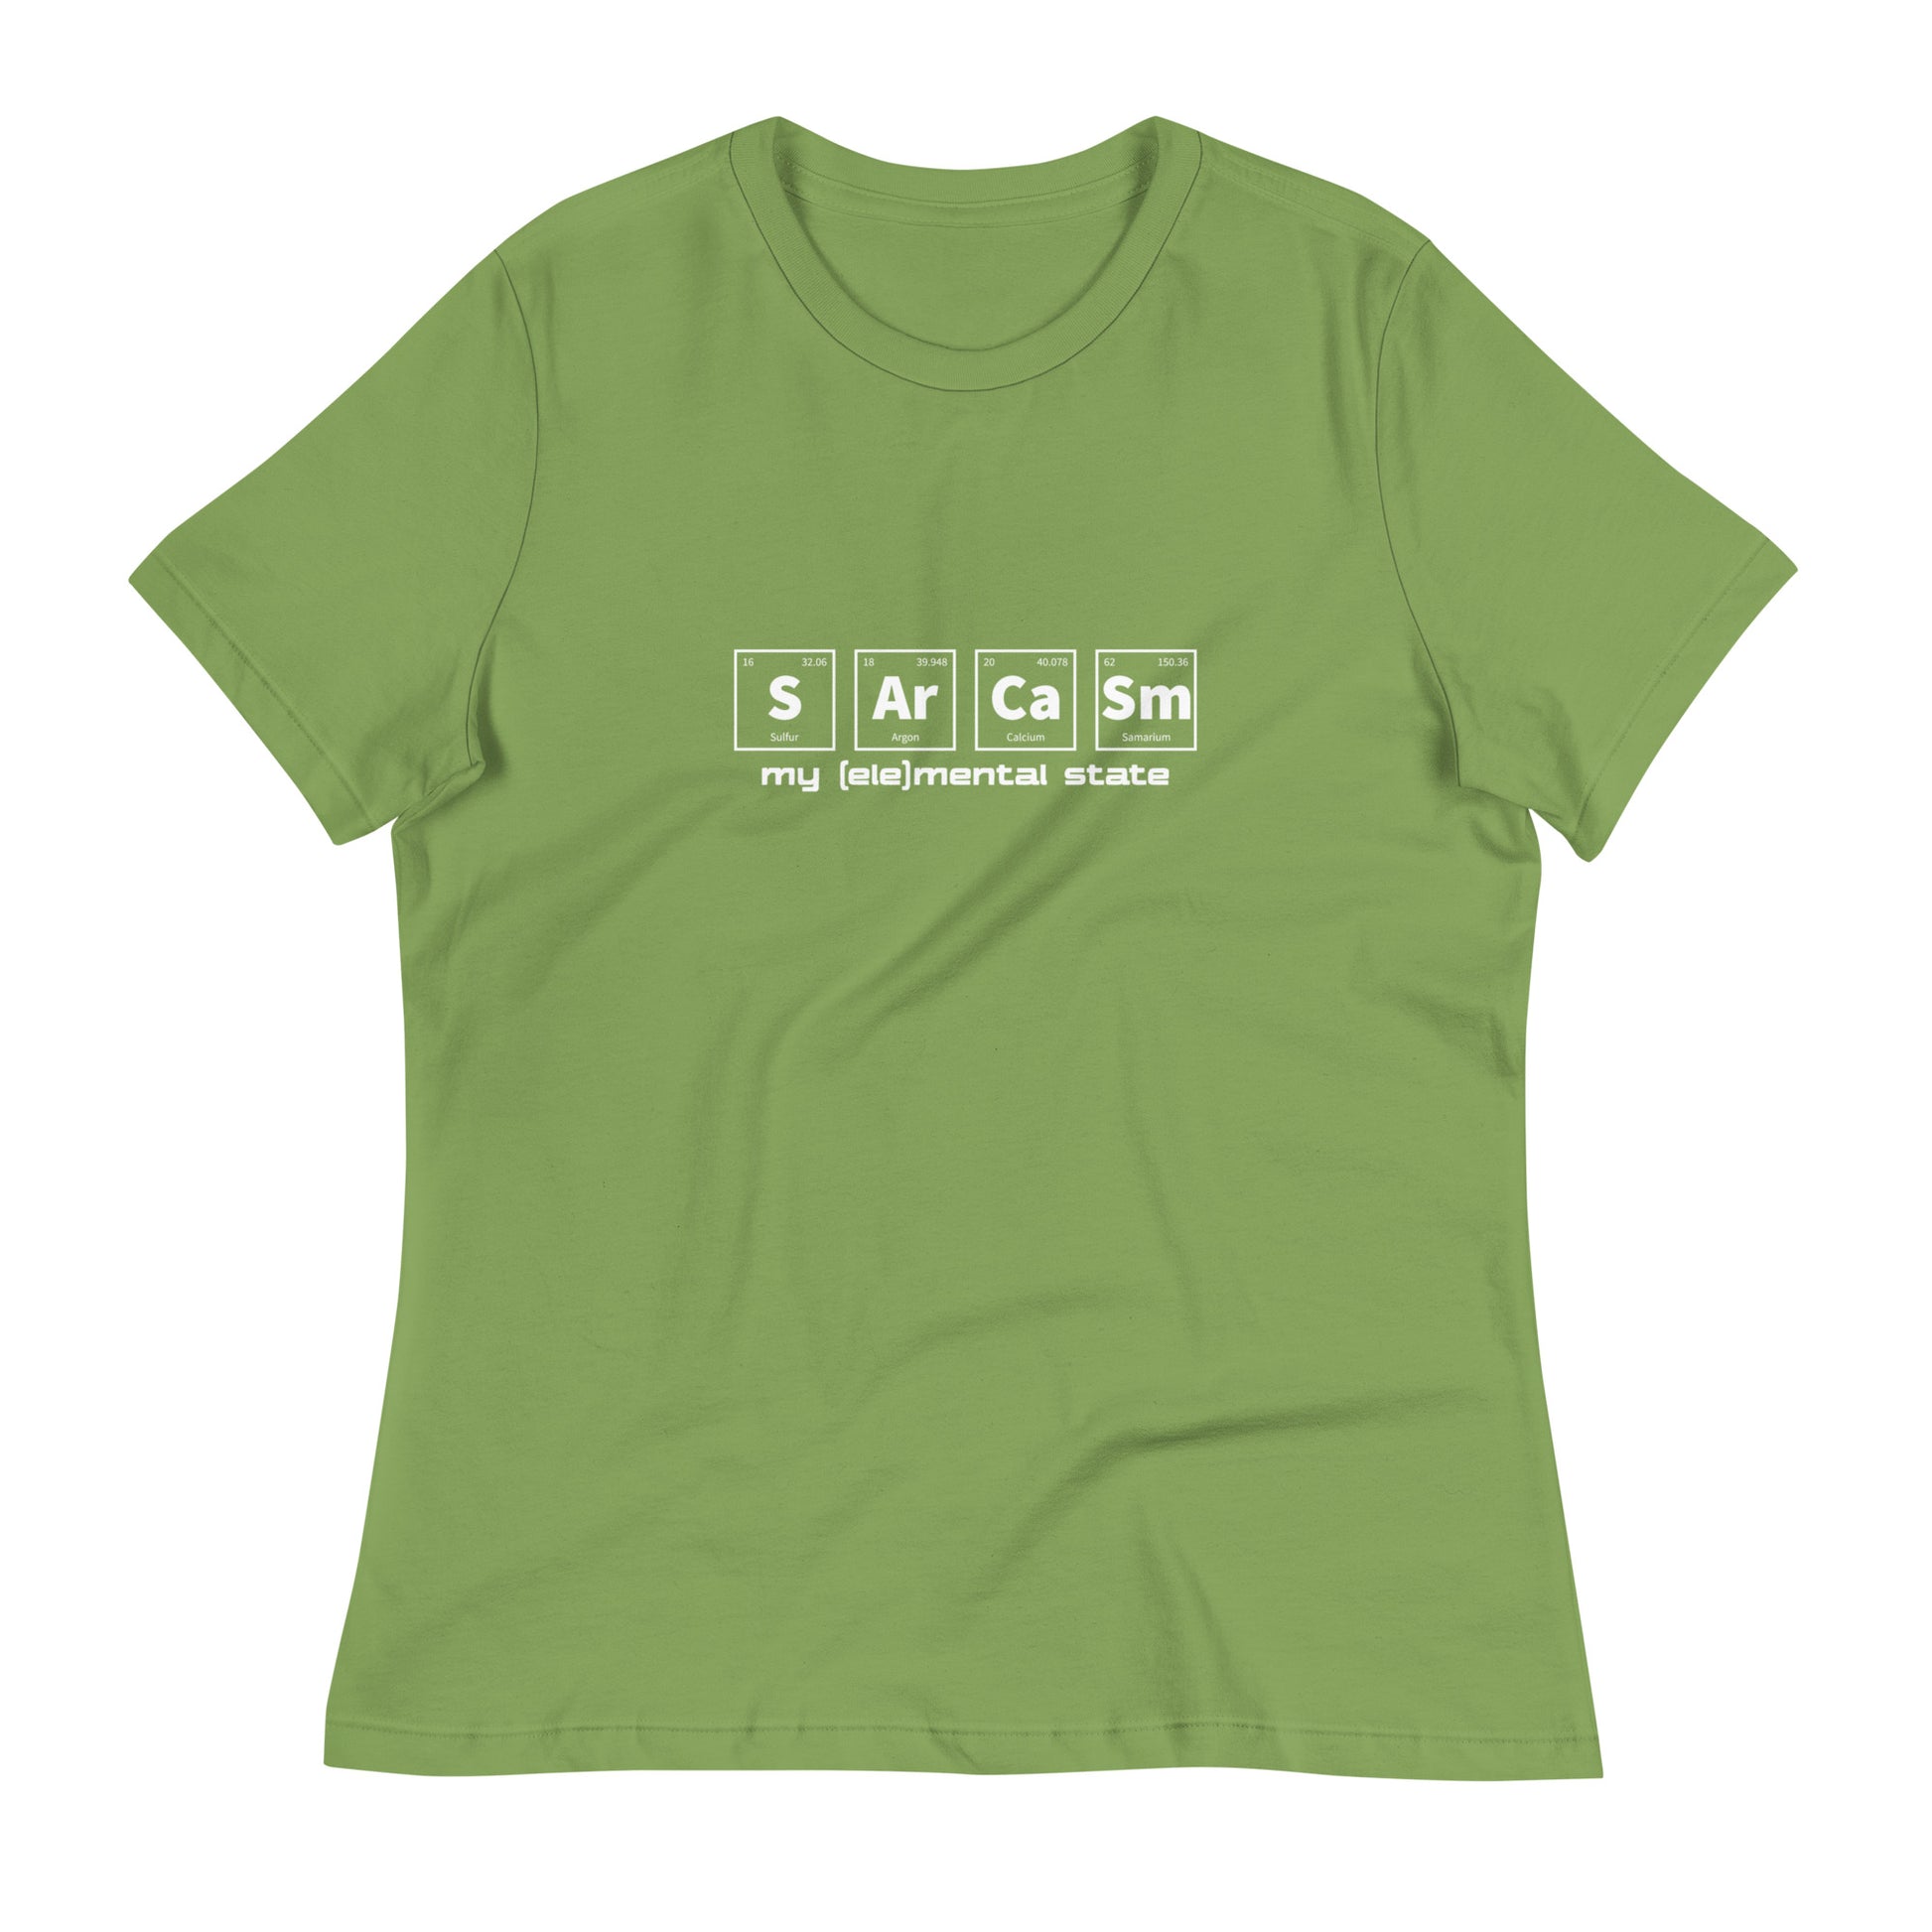 Leaf green women's relaxed fit t-shirt with graphic of periodic table of elements symbols for Sulfur (S), Argon (Ar), Calcium (Ca), and Samarium (Sm) and text "my (ele)mental state"